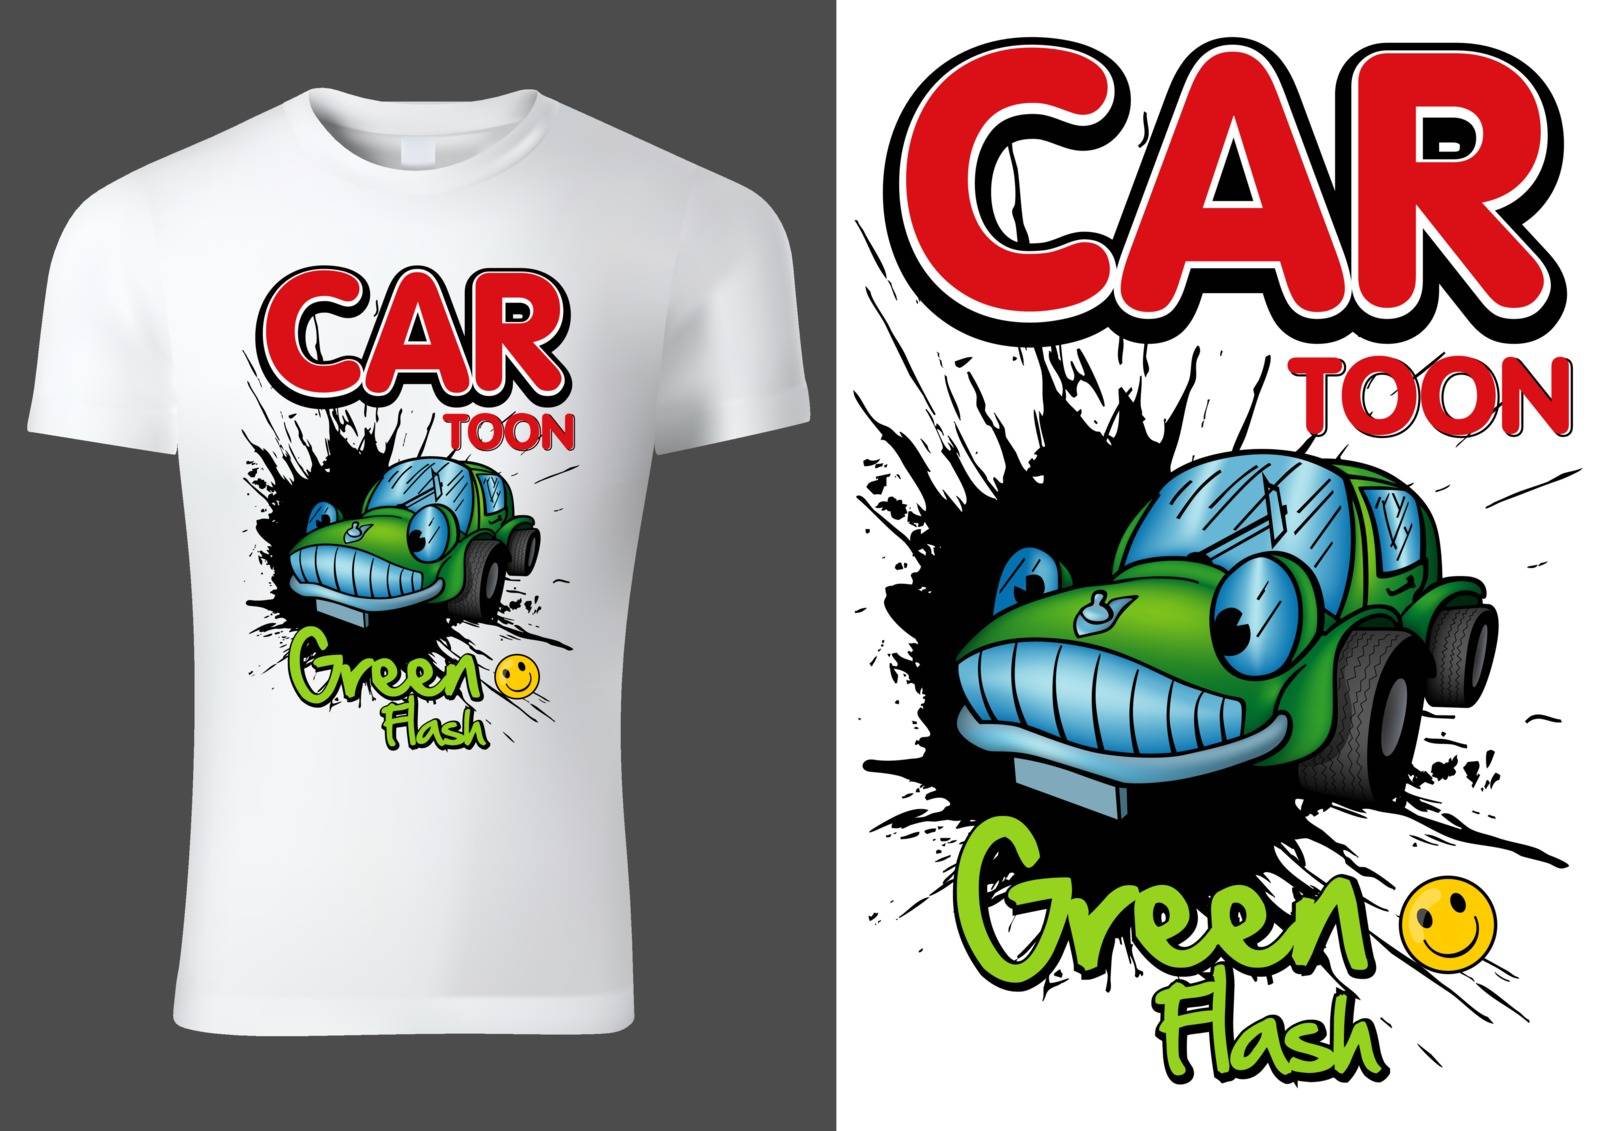 White Child T-shirt Design with Green Cartoon Car and Colored Inscriptions over Black Spatter - Cheerful Illustration, Vector